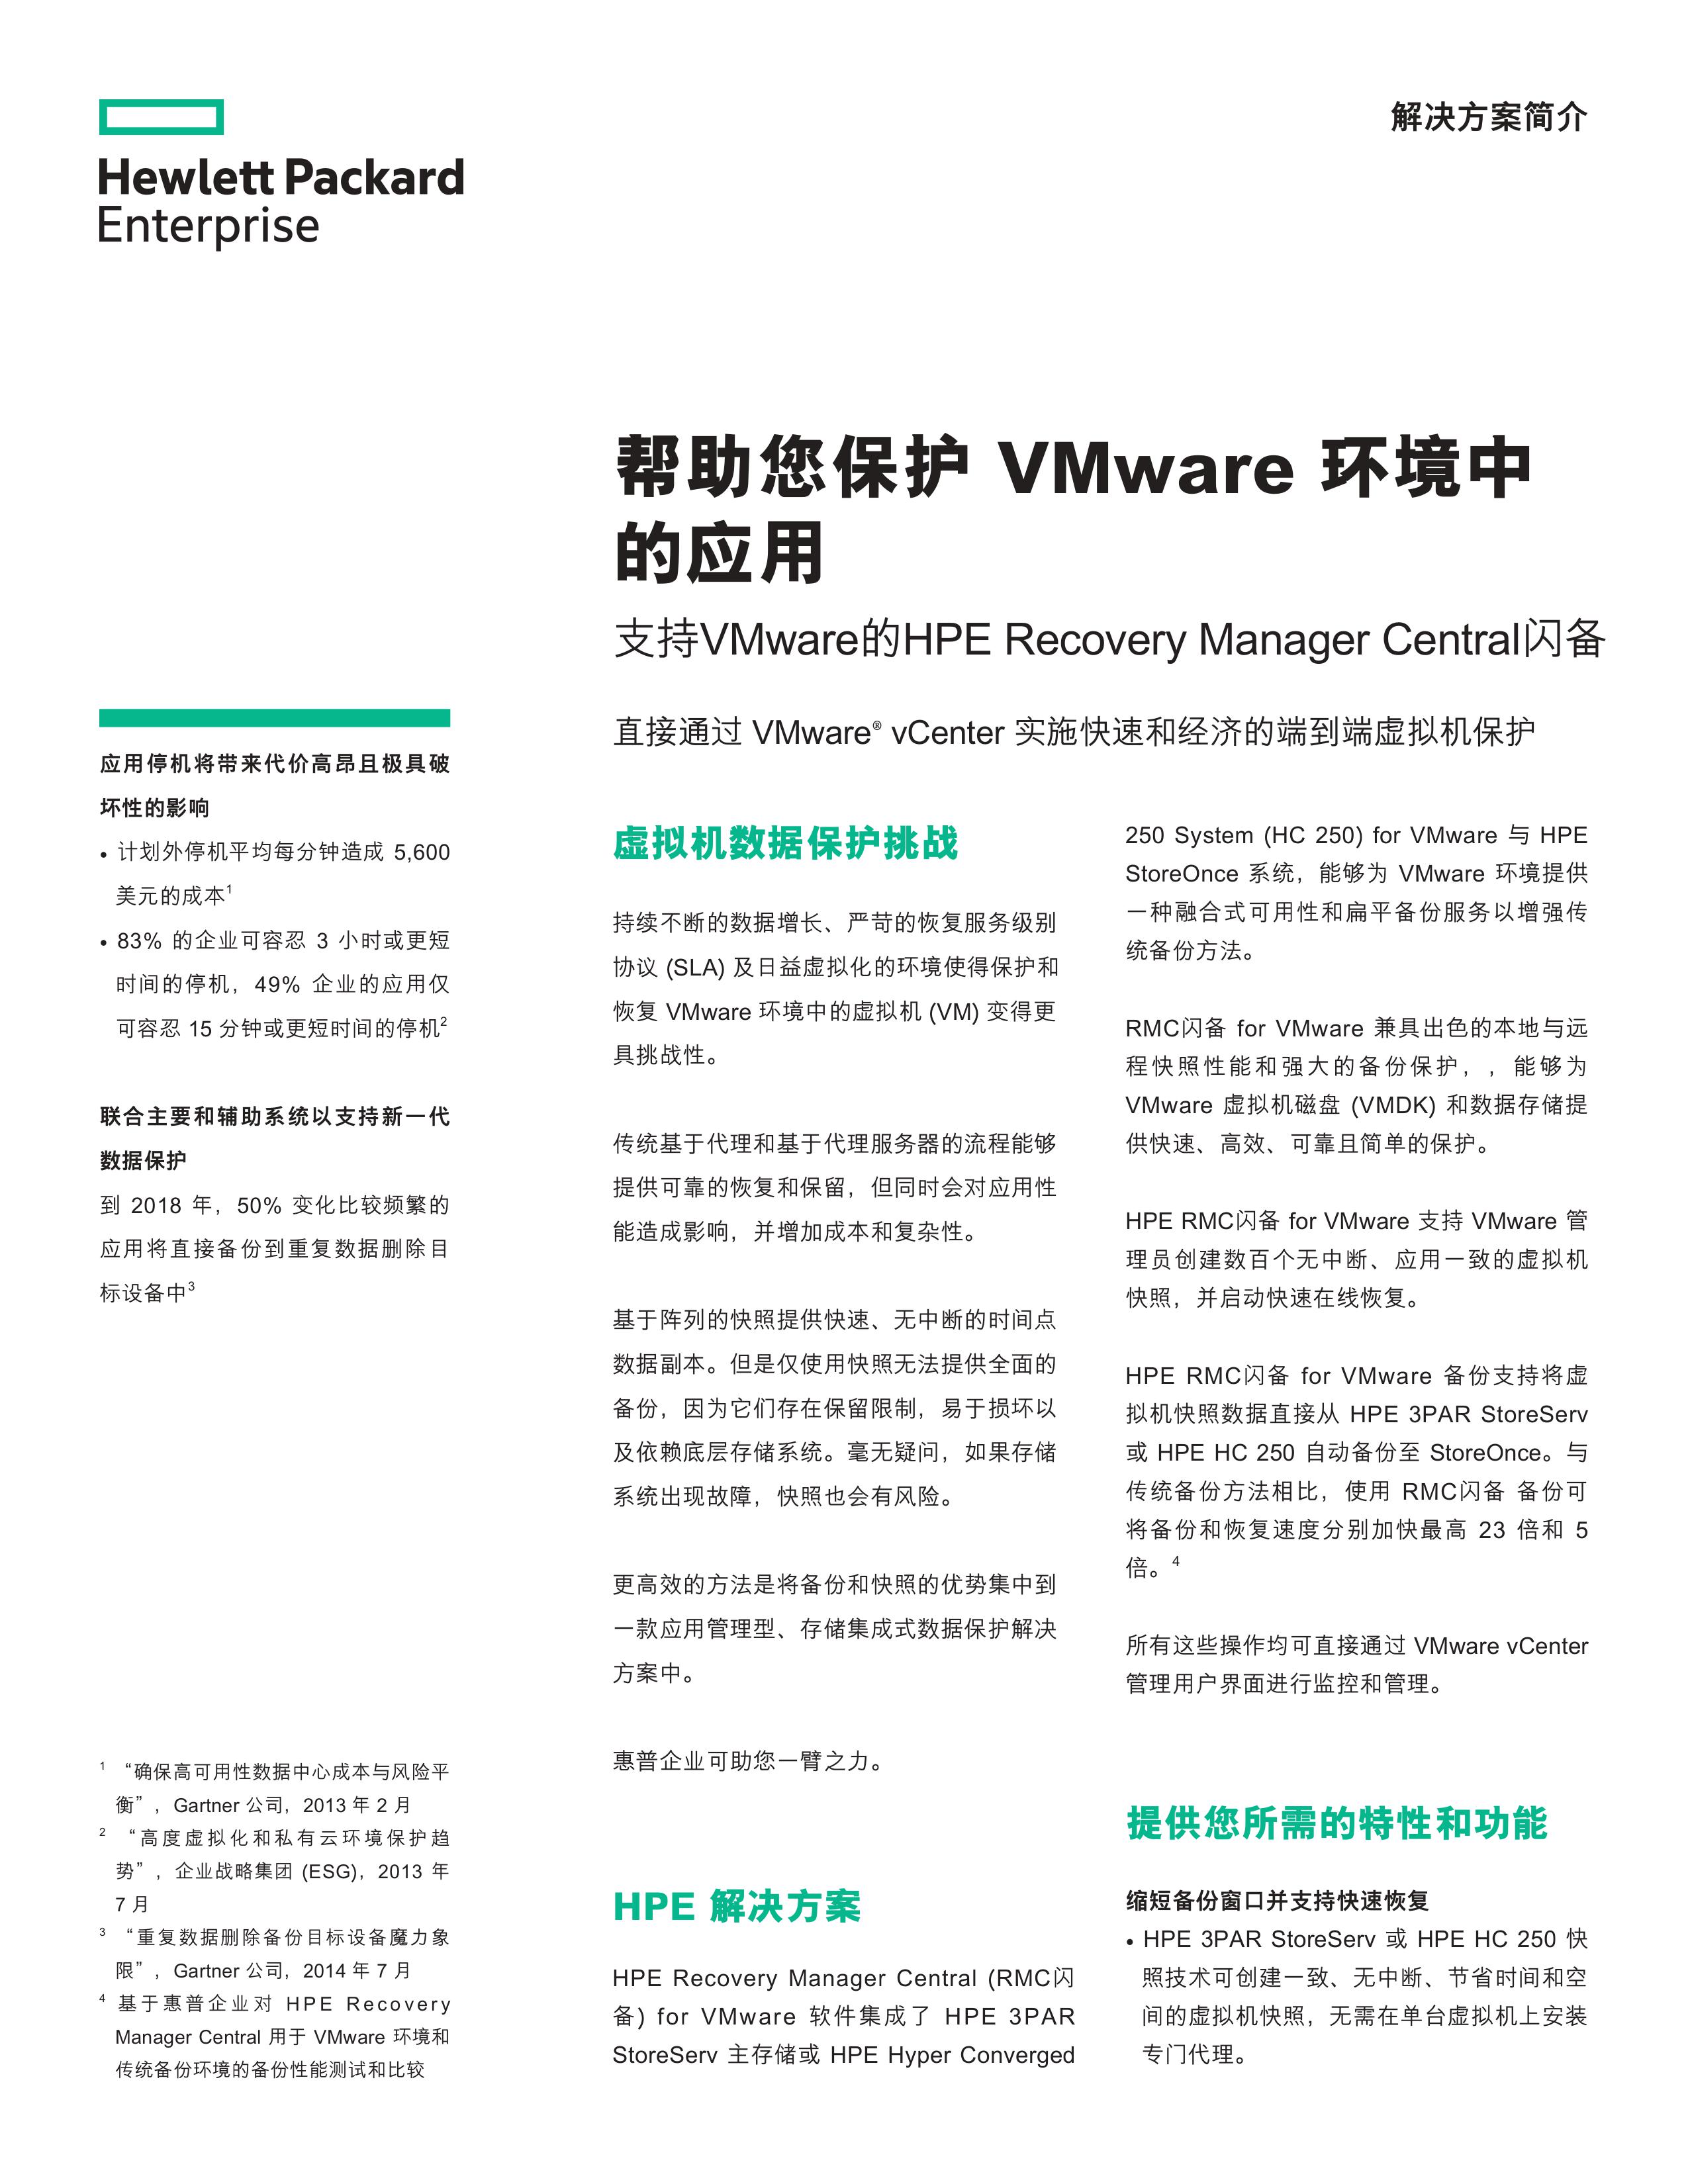 HPE Recovery_Manager_Central for VMware解決方案